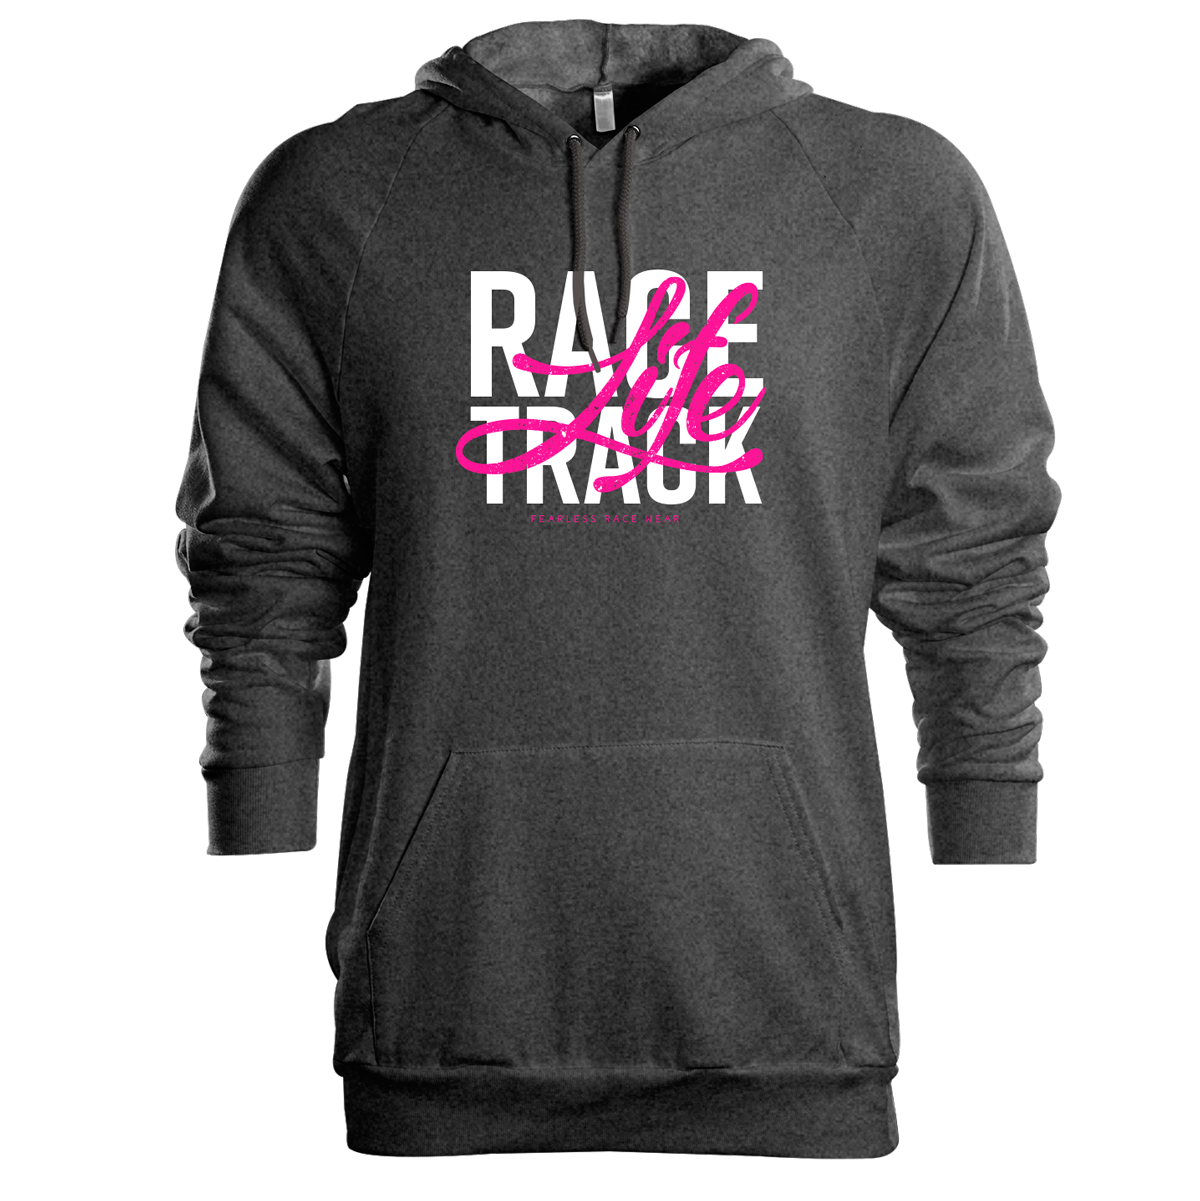 Racetrack Life Hoodies + T-Shirts | | Wear Print or Fearless Race Red Fuchsia